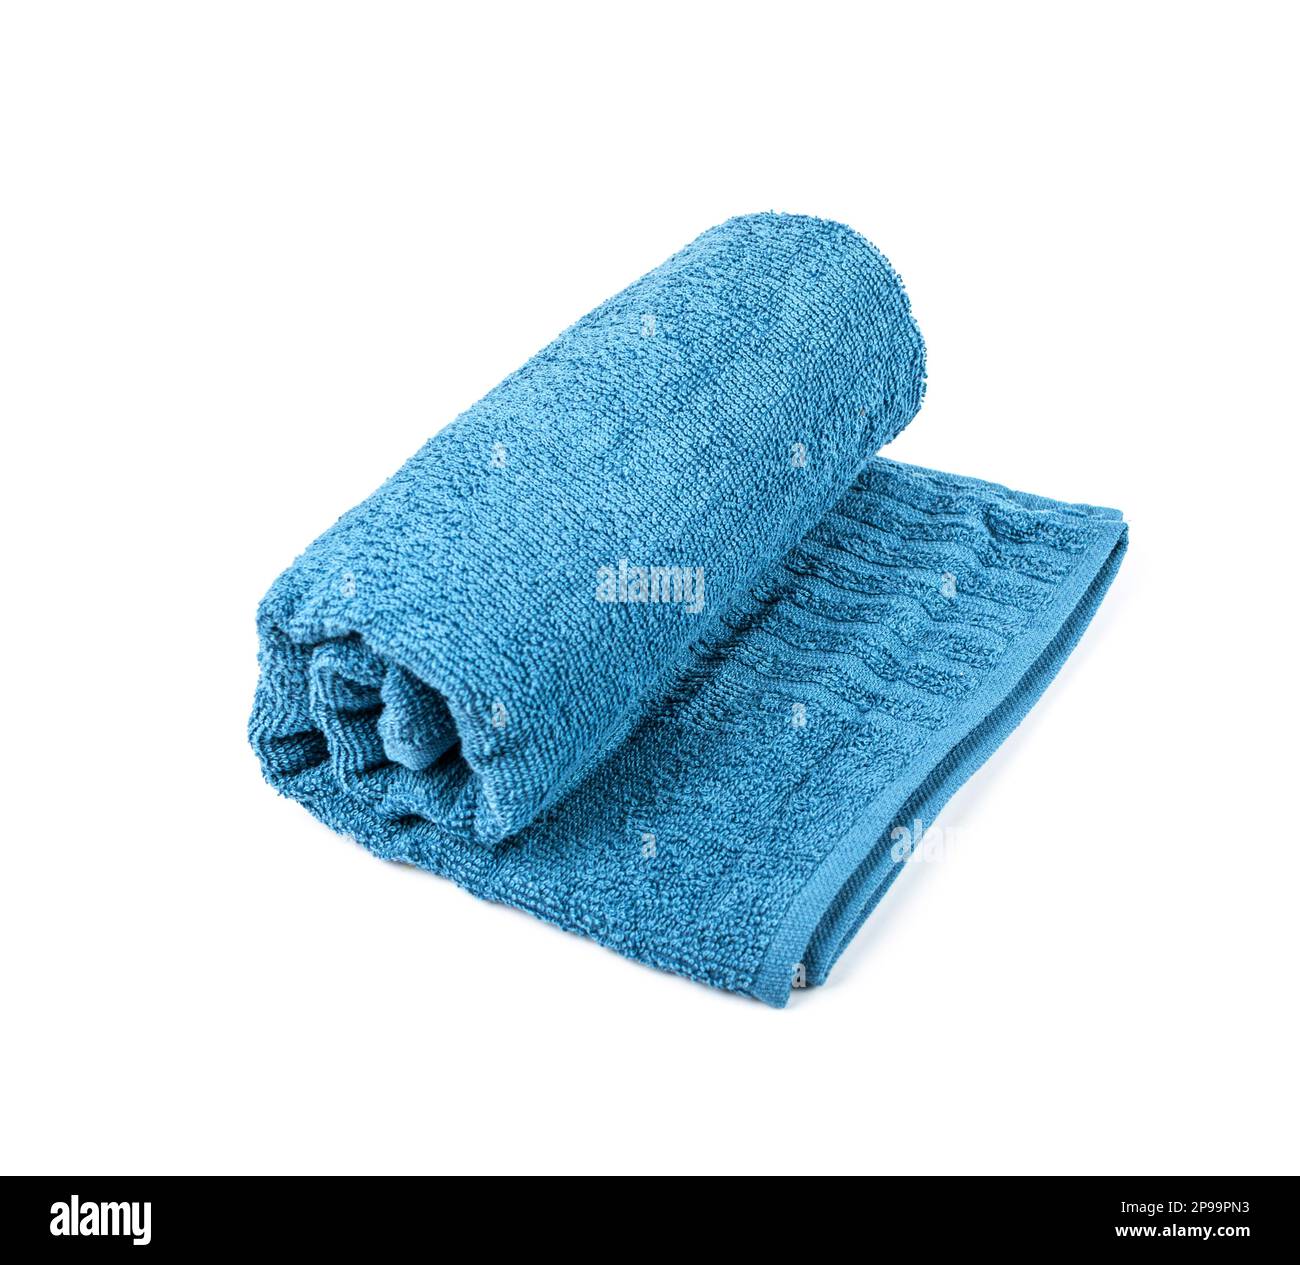 https://c8.alamy.com/comp/2P99PN3/rolled-blue-towel-isolated-new-terry-cotton-towel-soft-washcloth-on-white-background-2P99PN3.jpg